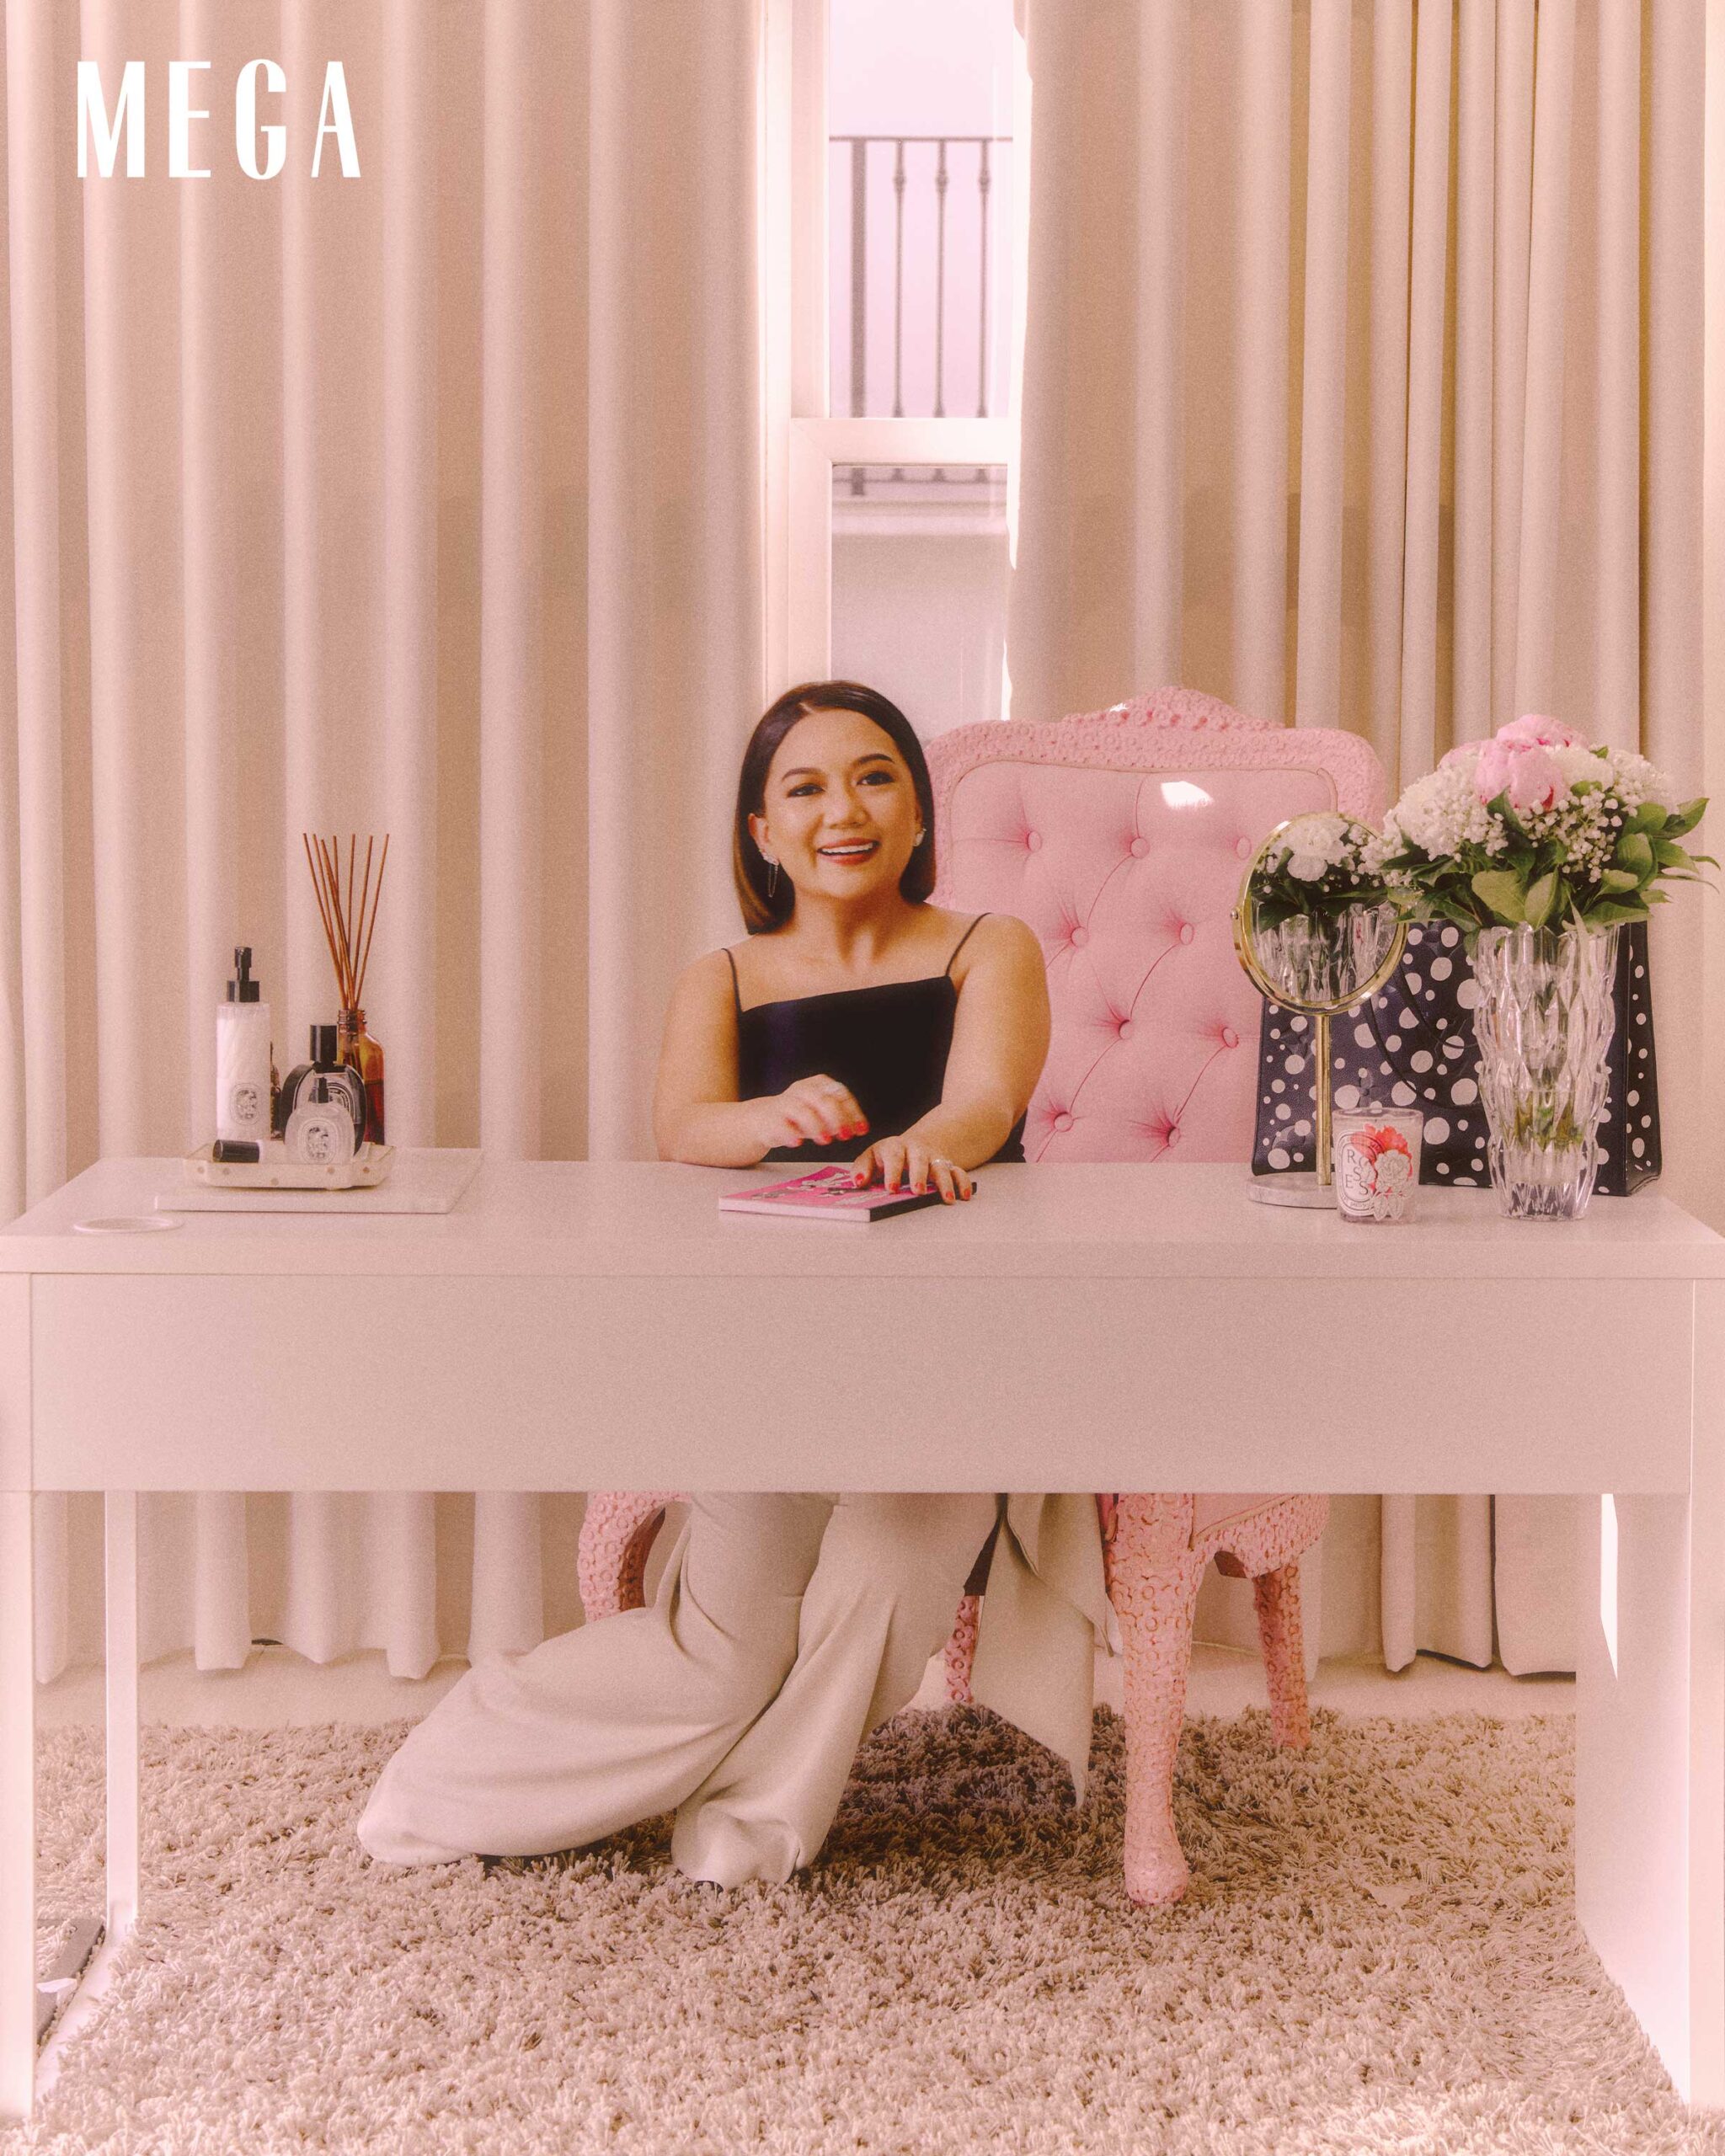 Nicole Morales spotted in her home office, a space that suggests her love for beauty at the most introspective